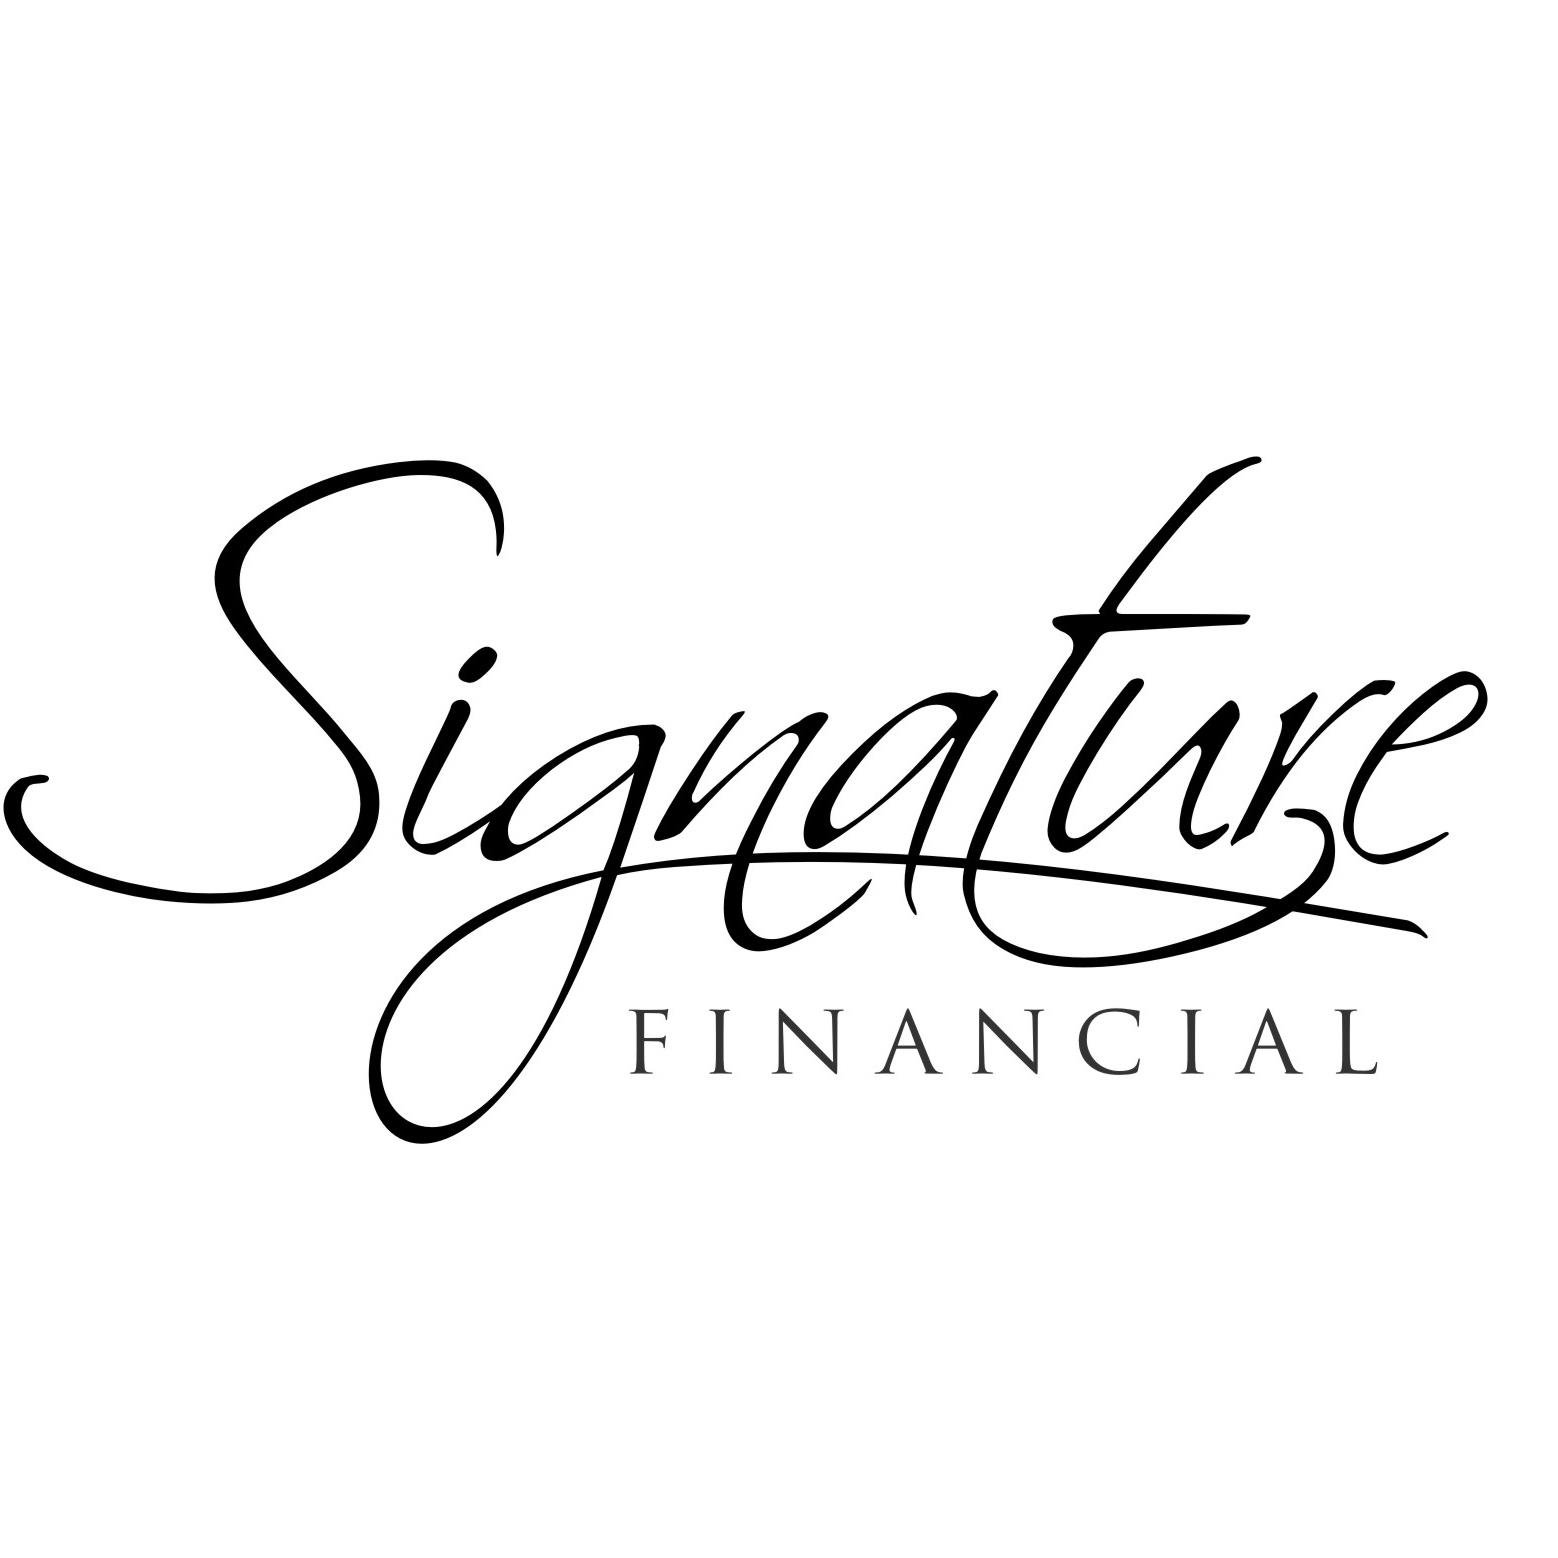 Signature Financial offers bookkeeping, accounting, and virtual assistant services to clients throughout Canada.